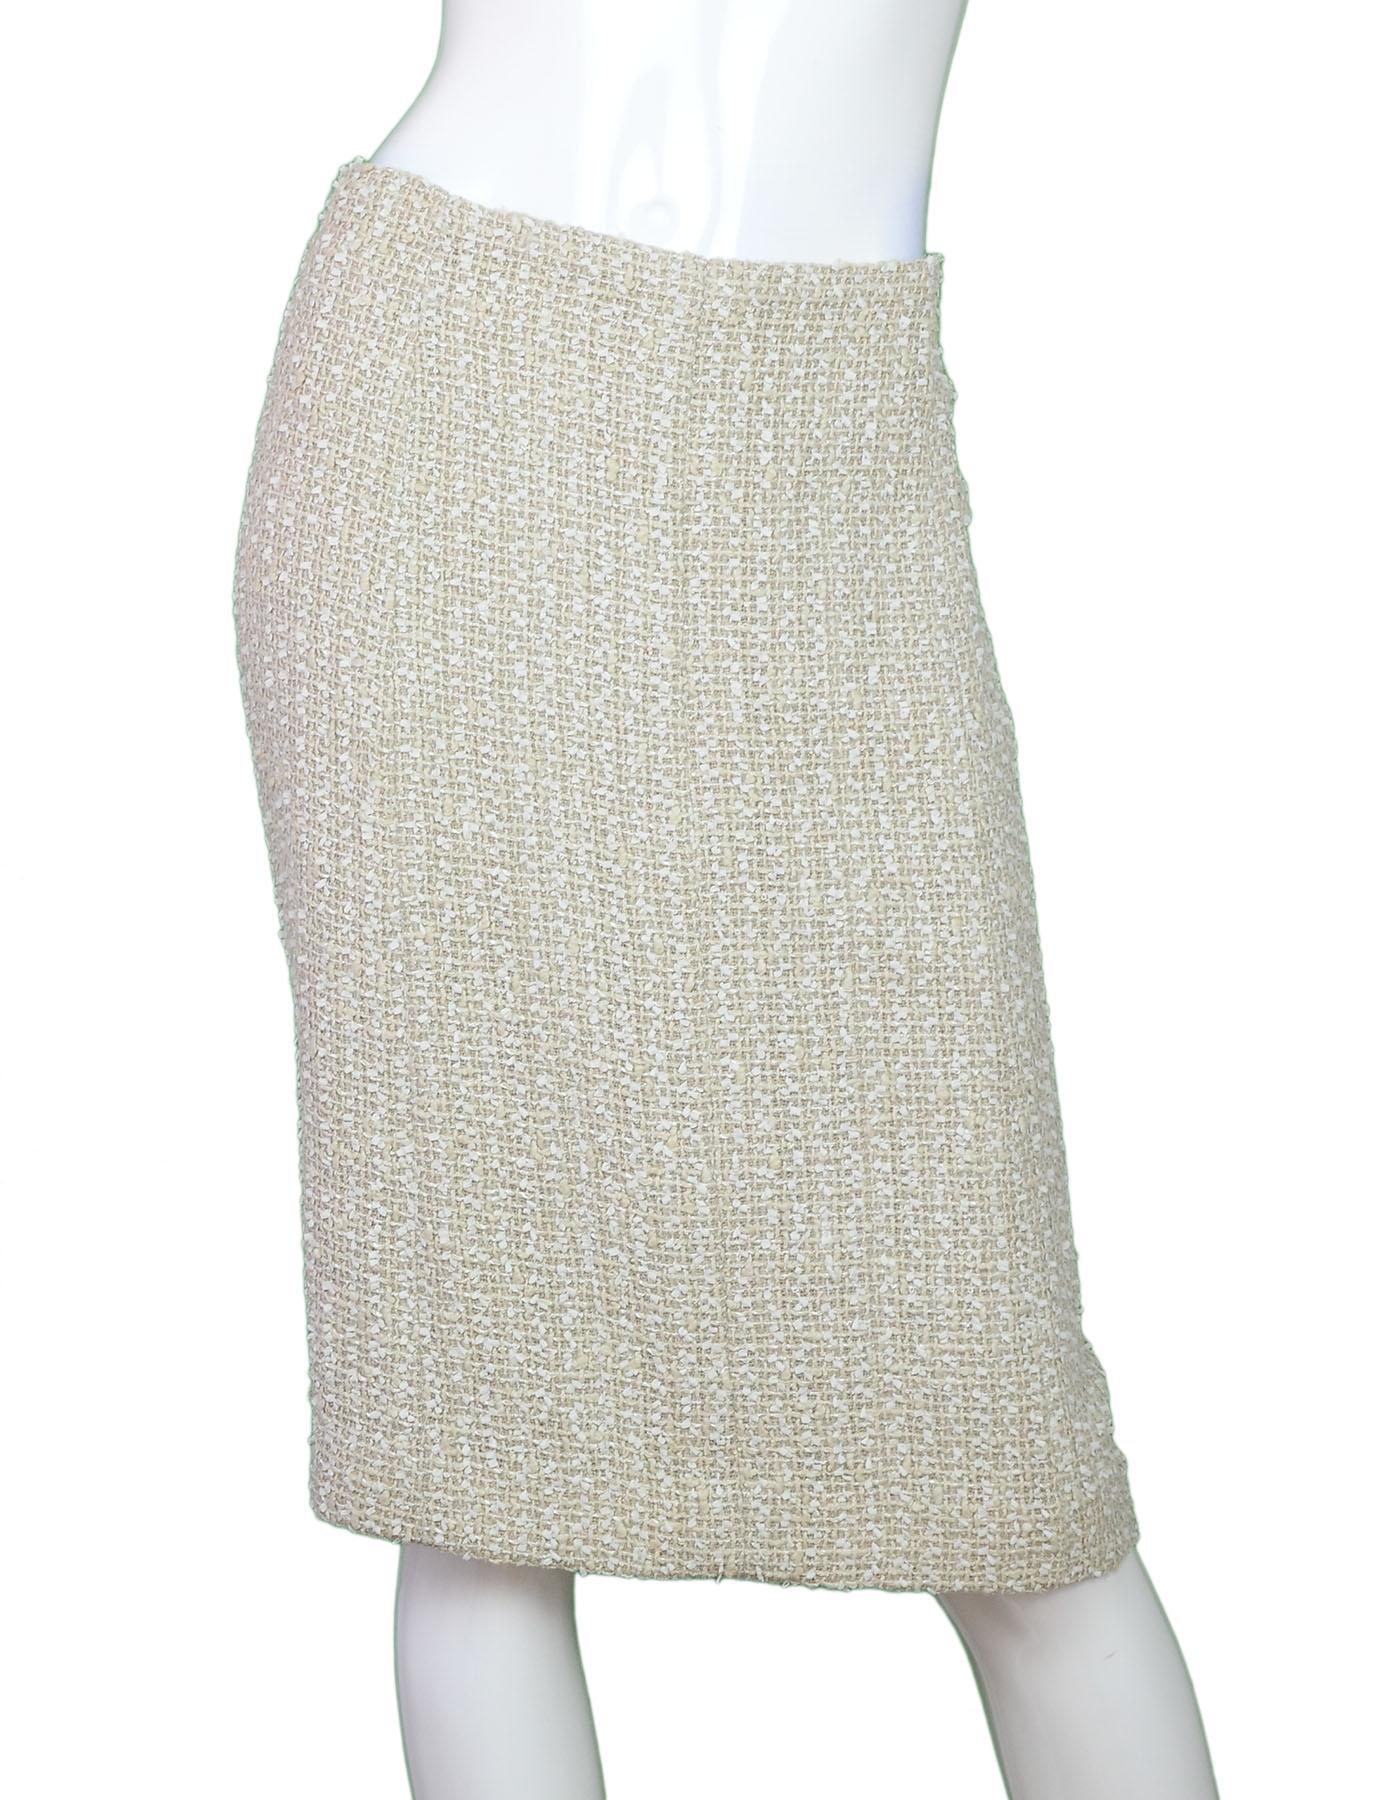 Chanel Beige Tweed Skirt Sz FR48

Made In: France
Year of Production: 1999
Color: Beige
Composition: 44% cotton, 27% wool, 14% nylon, 12% rayon, 3% linen
Lining: Beige wool
Closure/opening: Back zipper
Exterior Pockets: None
Overall Condition: